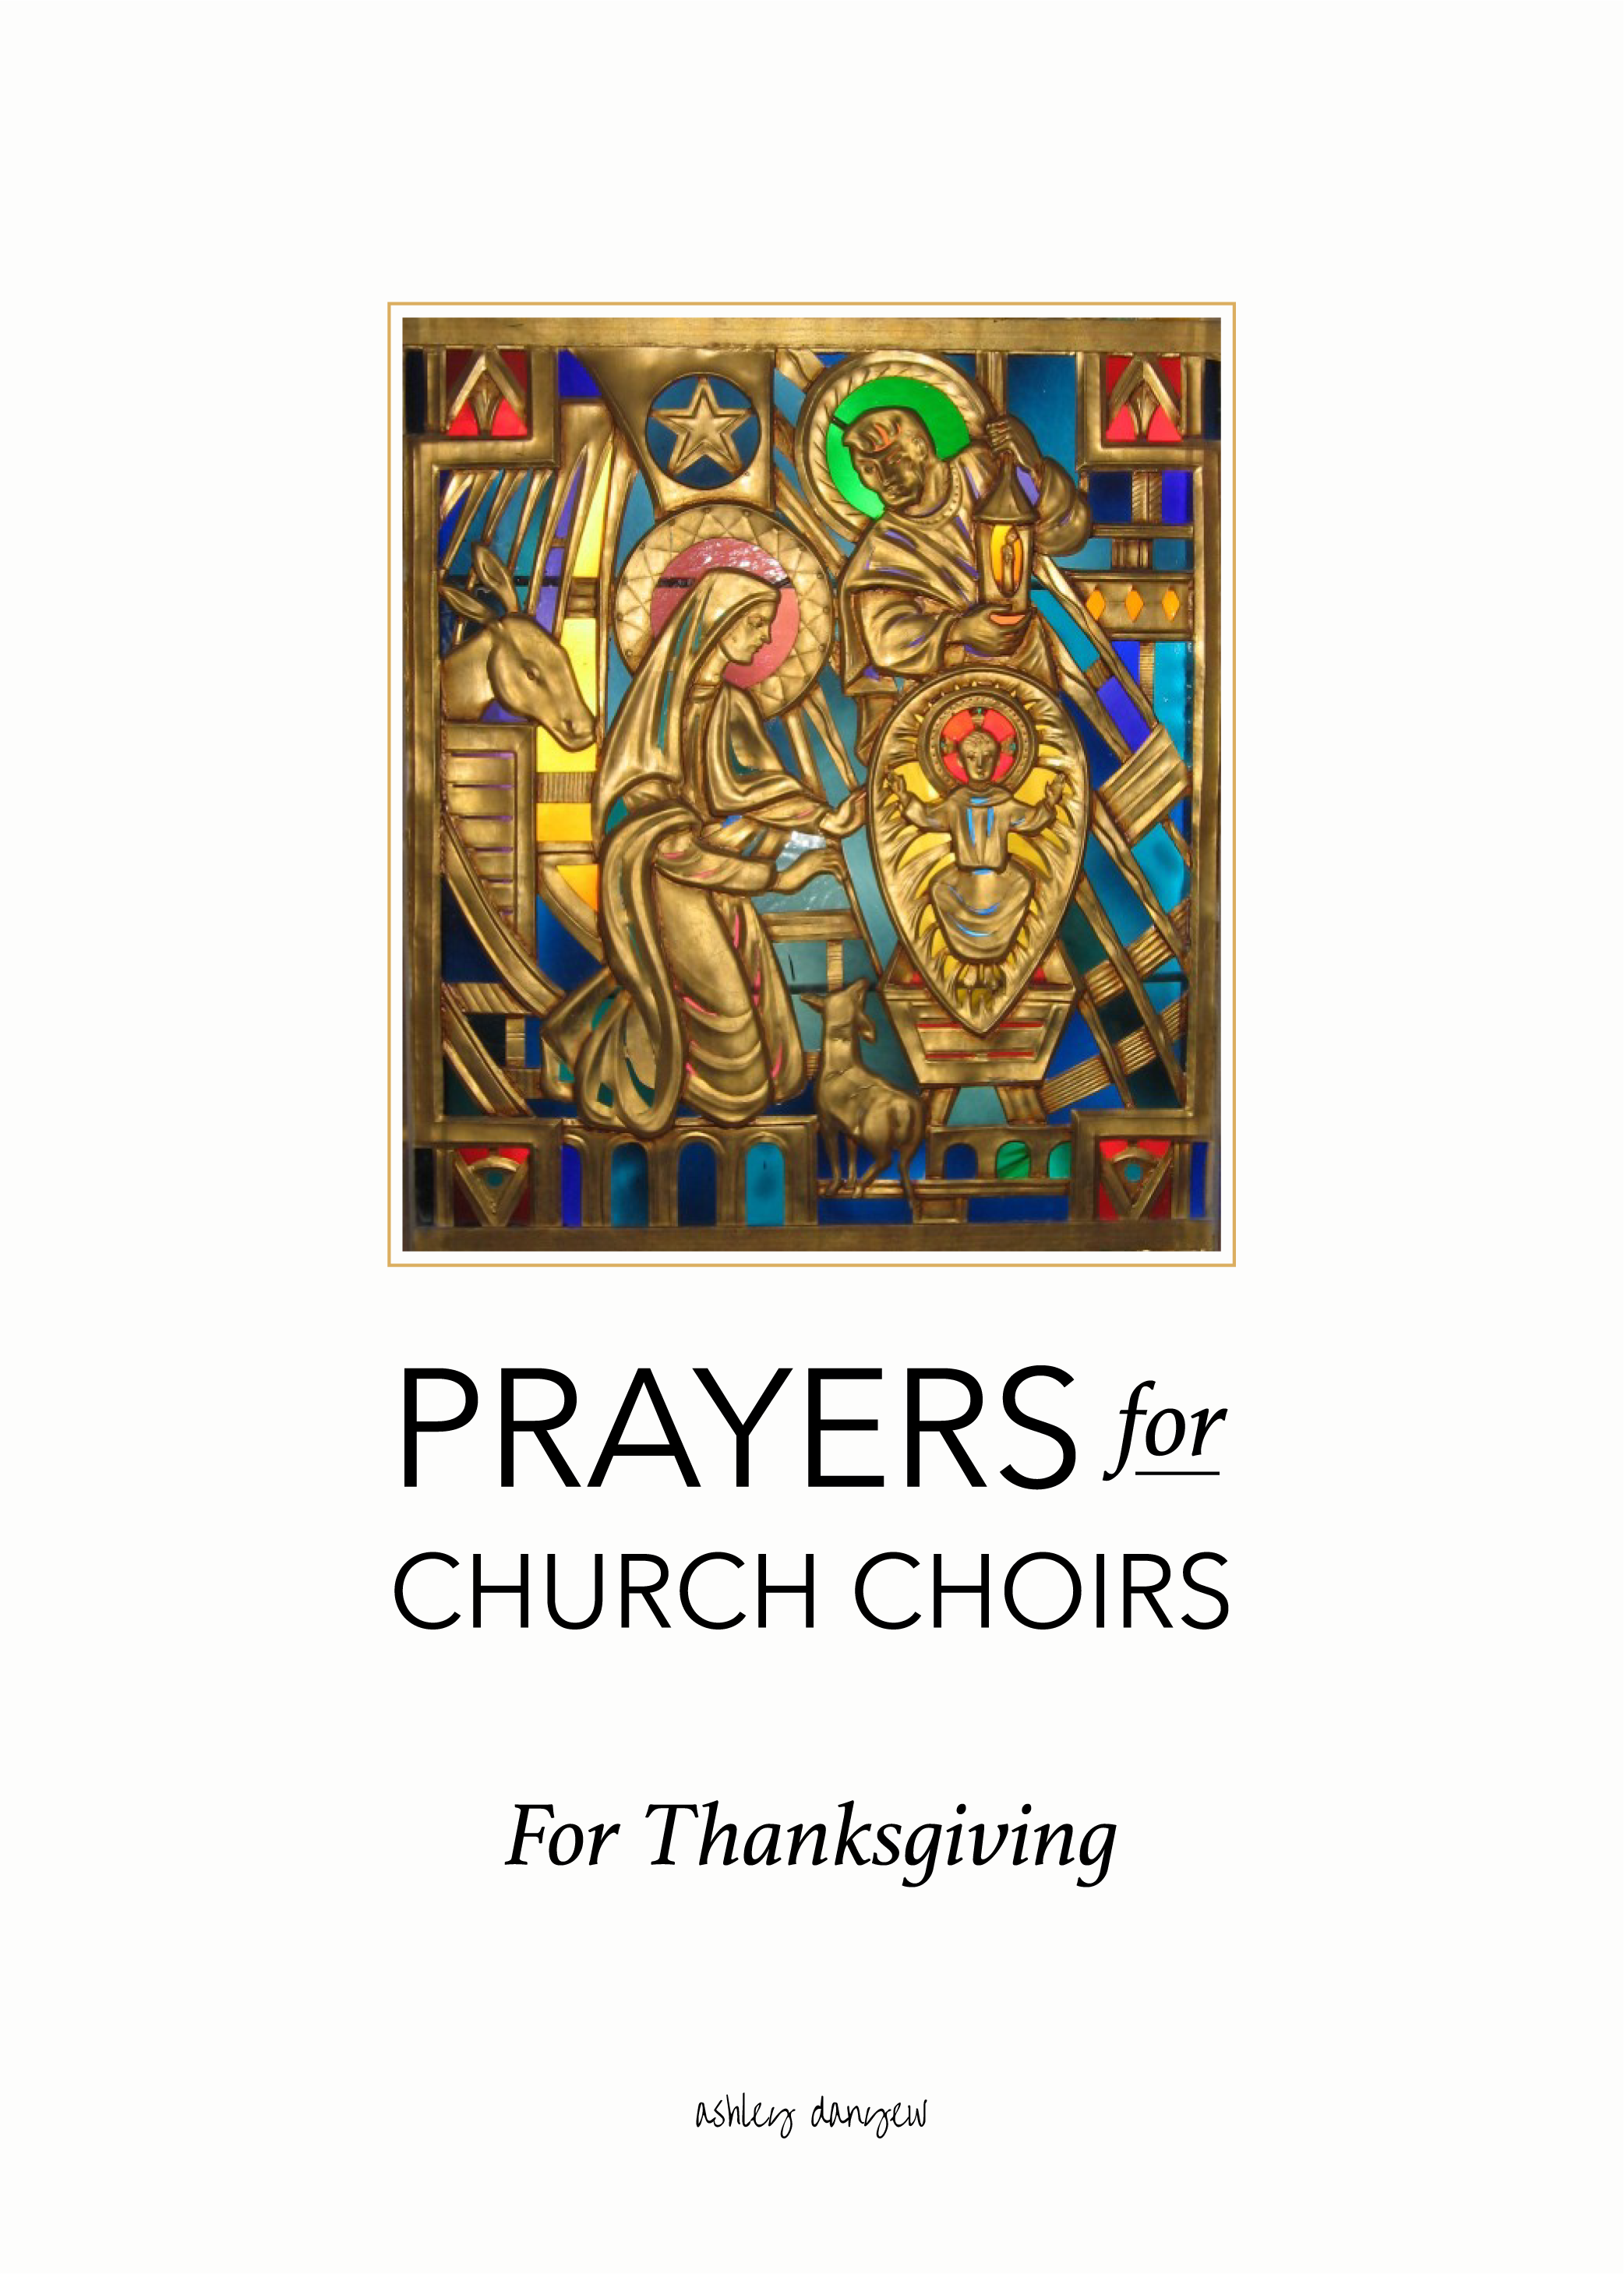 Copy of Prayers for Church Choirs: For Thanksgiving